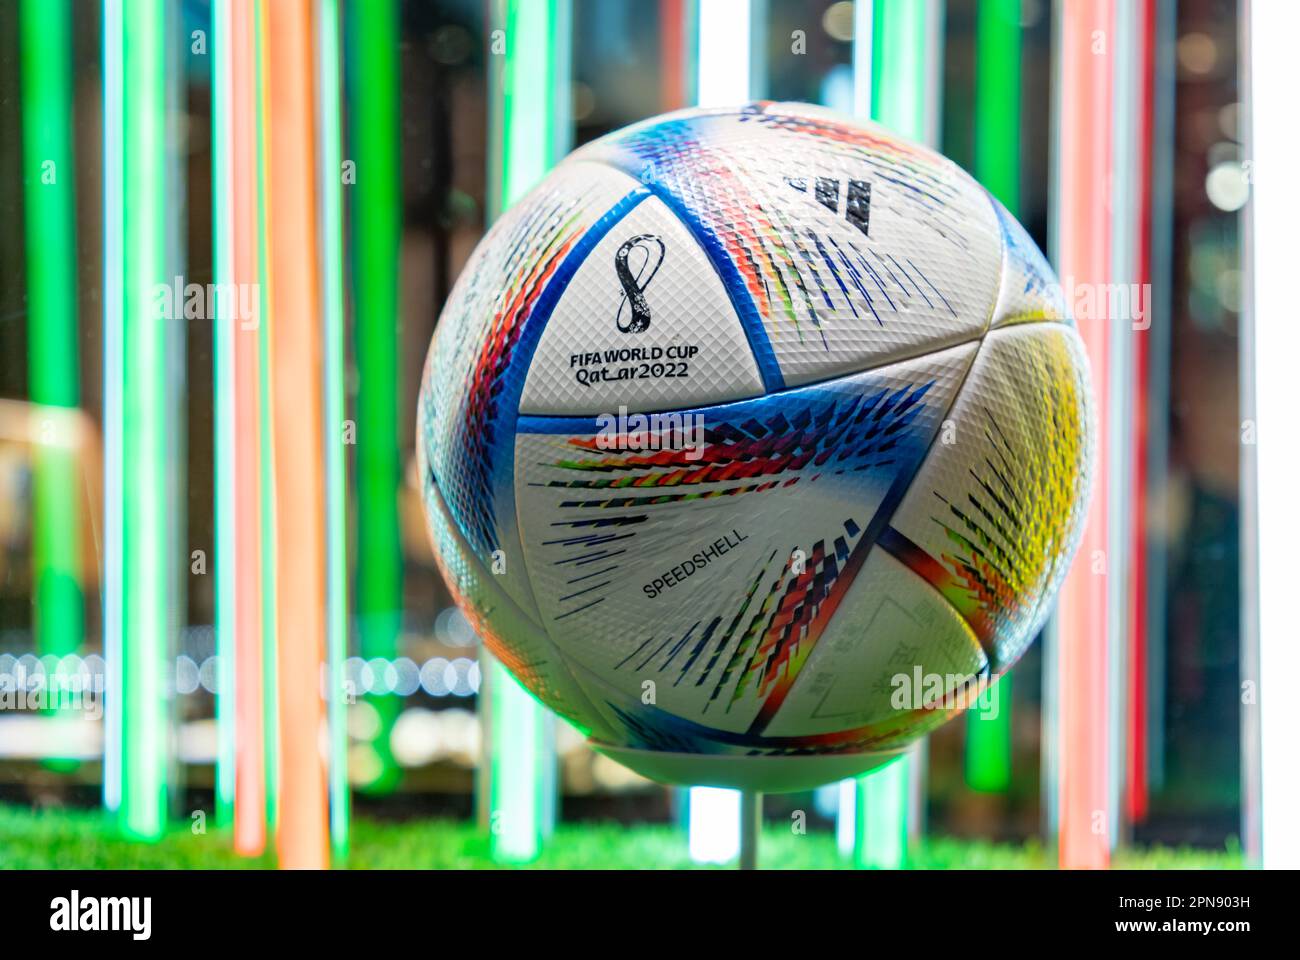 A picture of the Al Rihla, the Adidas FIFA World Cup 2022 in Qatar official ball. Stock Photo